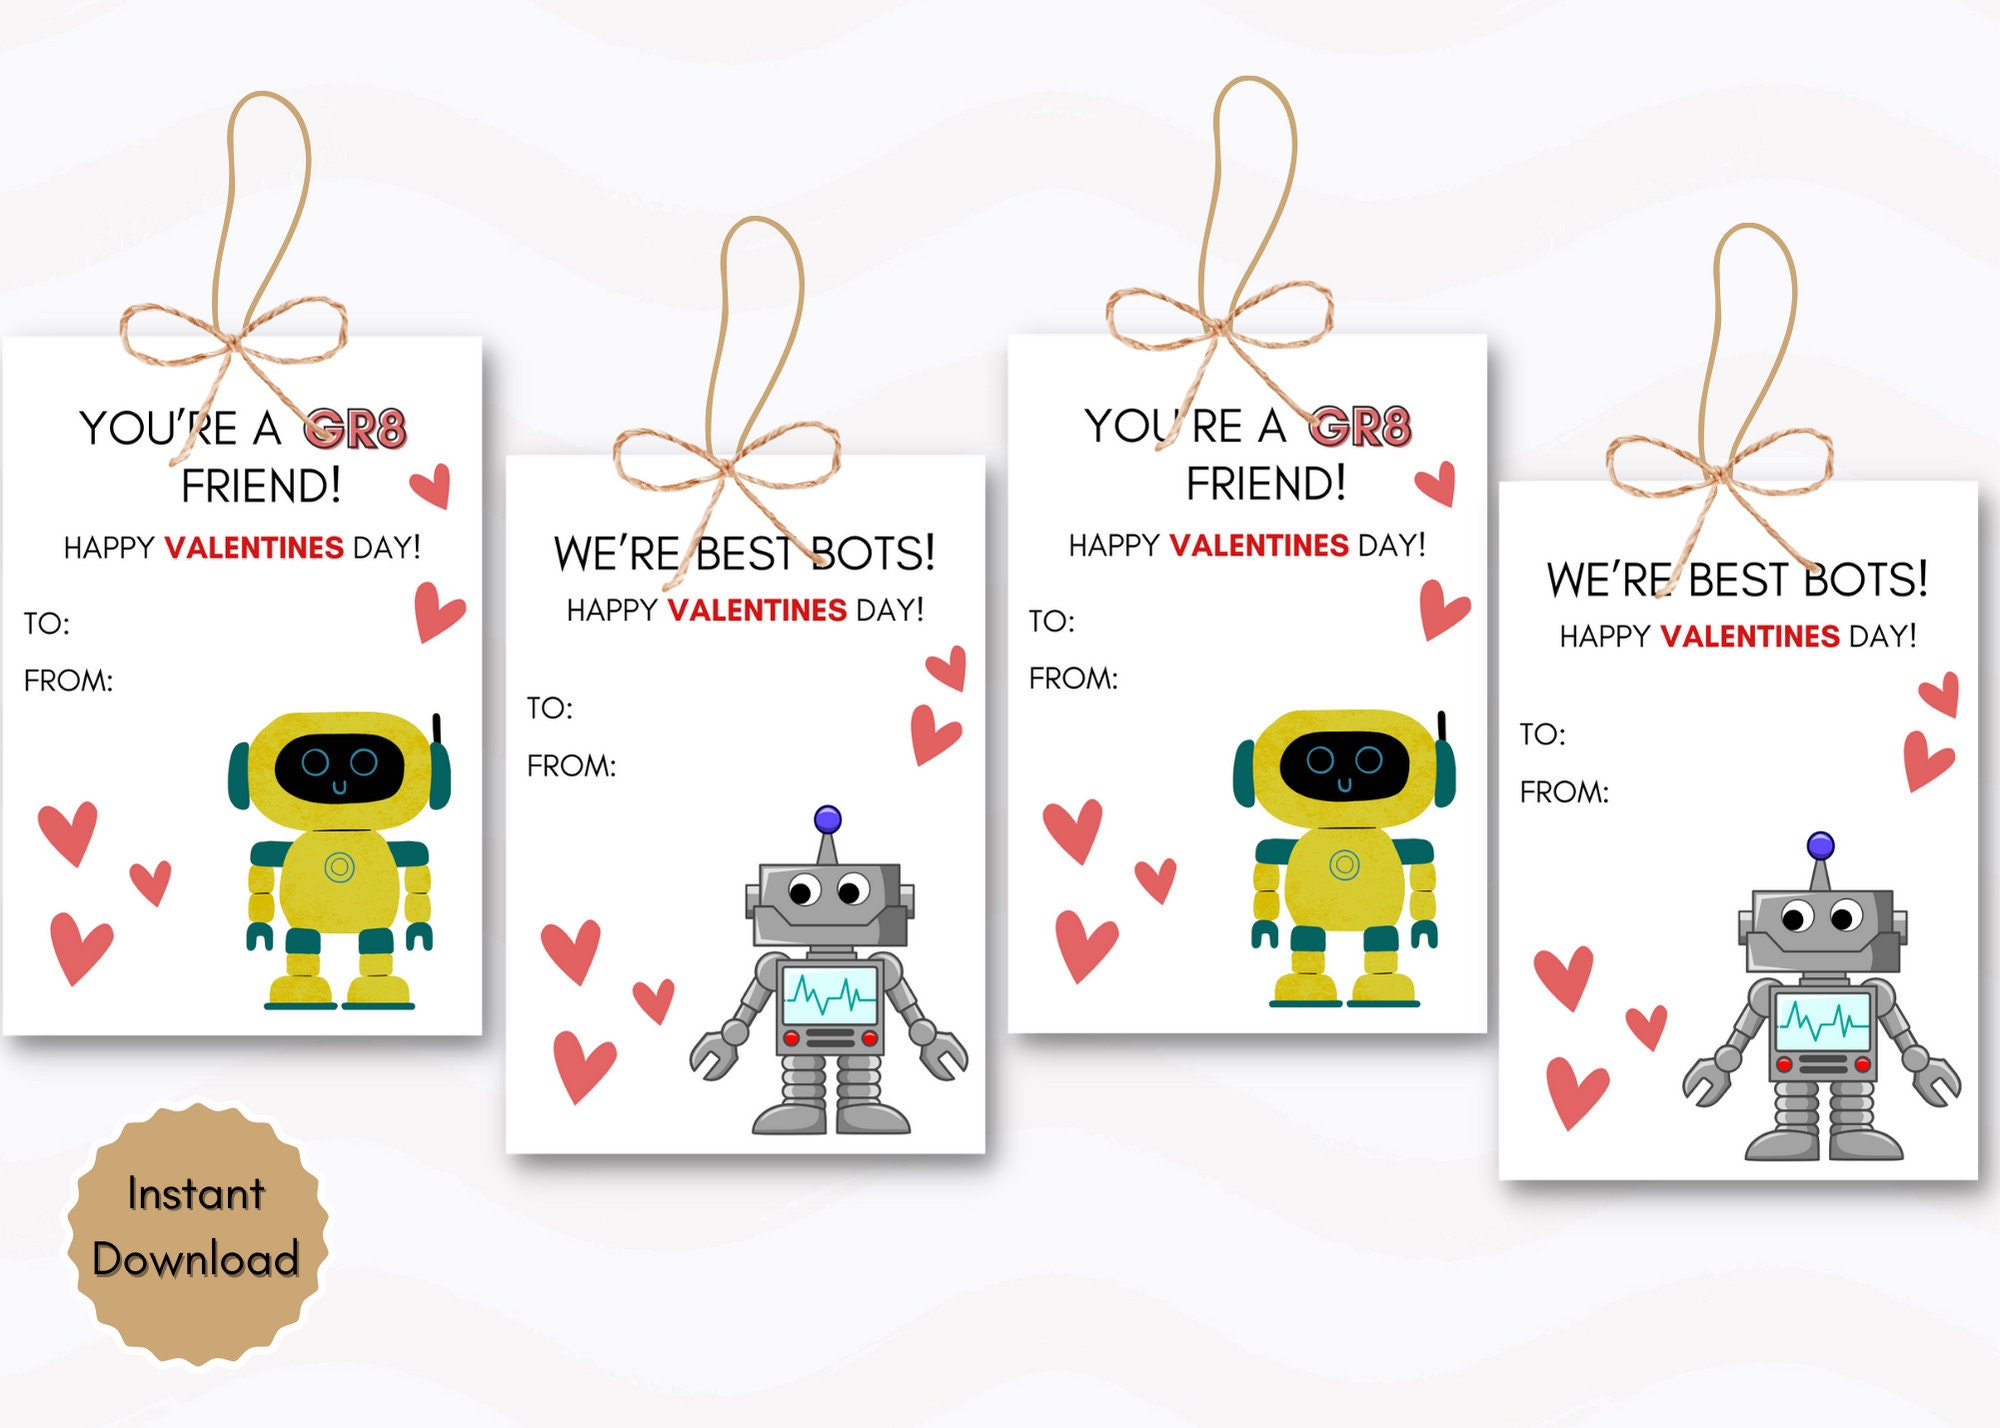 Personalized Robot Stickers, Robot Birthday Party, Robot Party Favor  Stickers, Customized Birthday Party Favor Thank You Stickers 